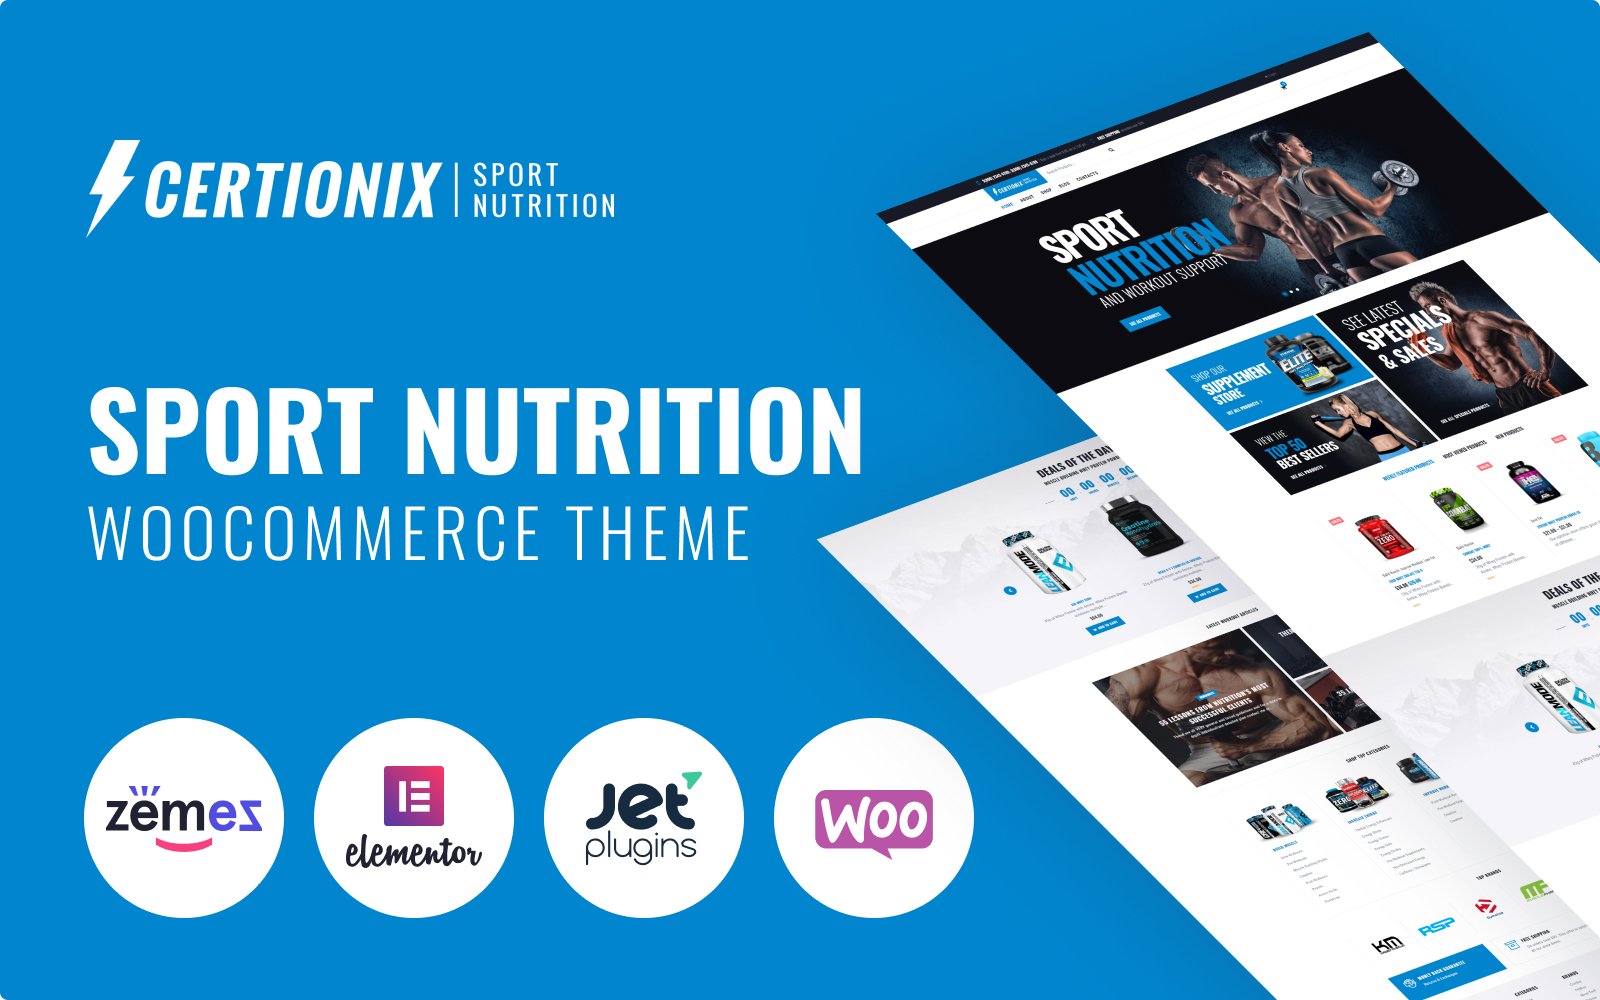 certionix-sport-nutrition-website-template-with-woocommerce-and-elementor-woocommerce-theme_65870-4-original.jpg